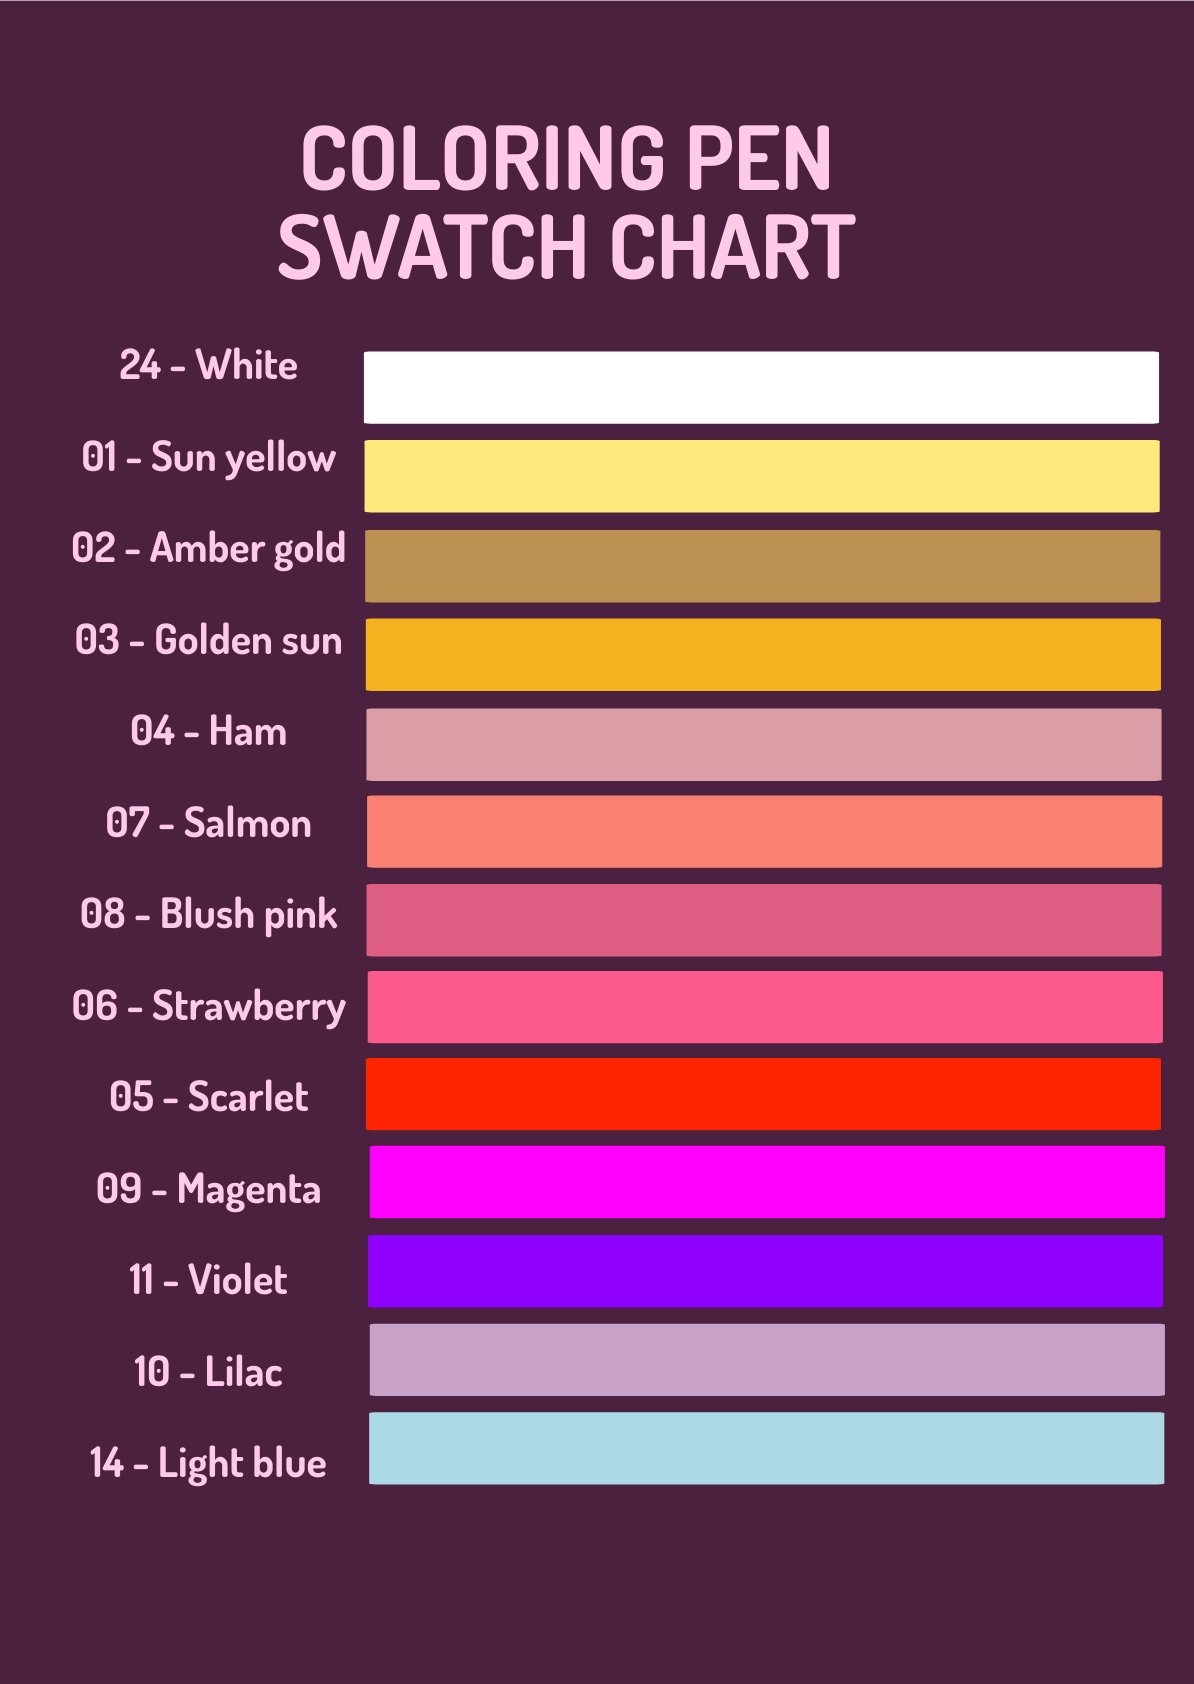 Coloring Pen Swatch Chart